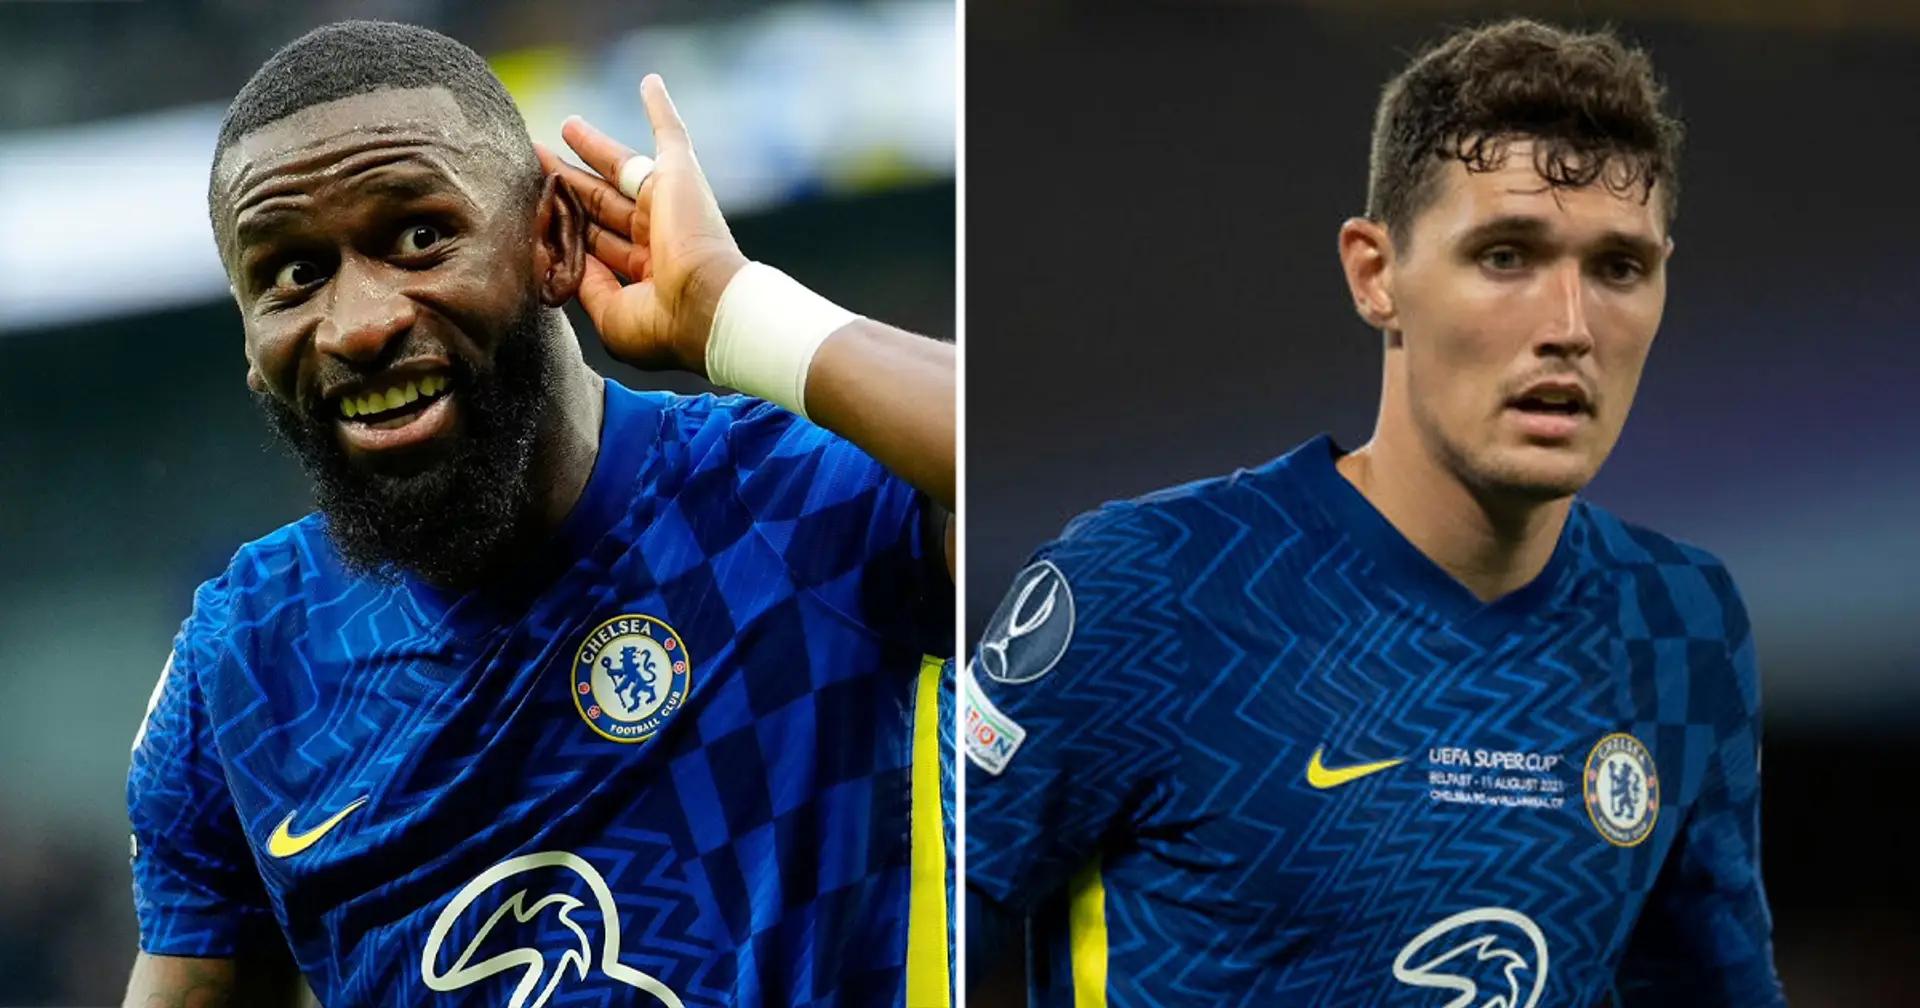 Chelsea plot new contracts for 3 key players after finalising Rudiger and Christensen deals (reliability: 4 stars)